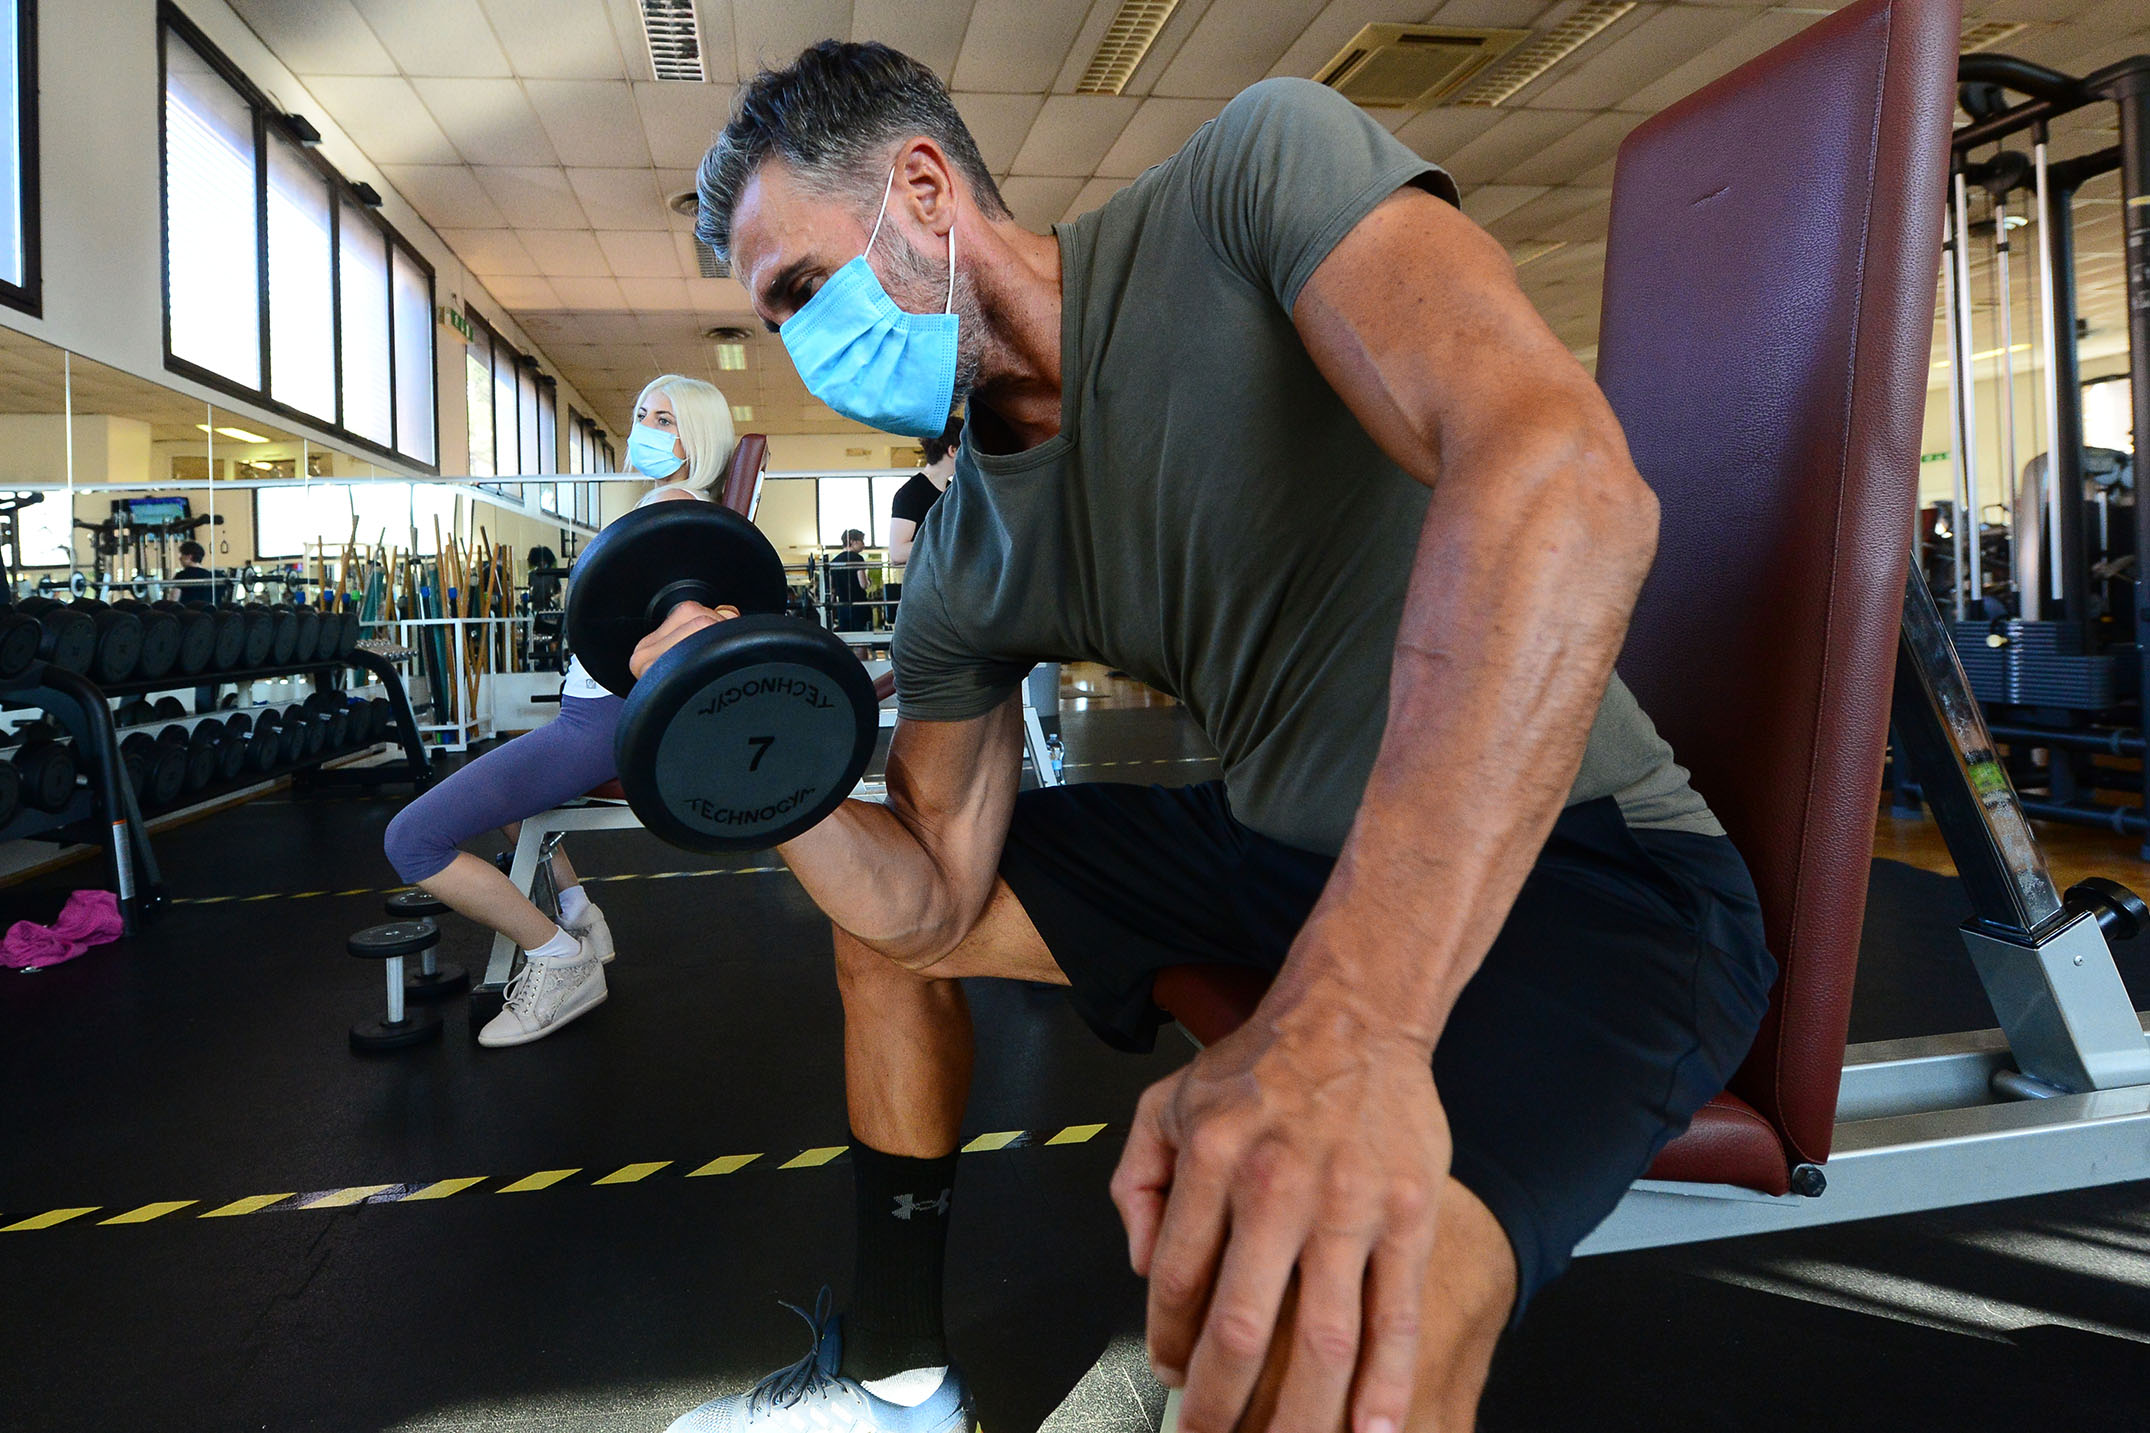 A man wears a face mask as he exercises with free weights at Bologna's Lodi Gym in Italy on May 25.